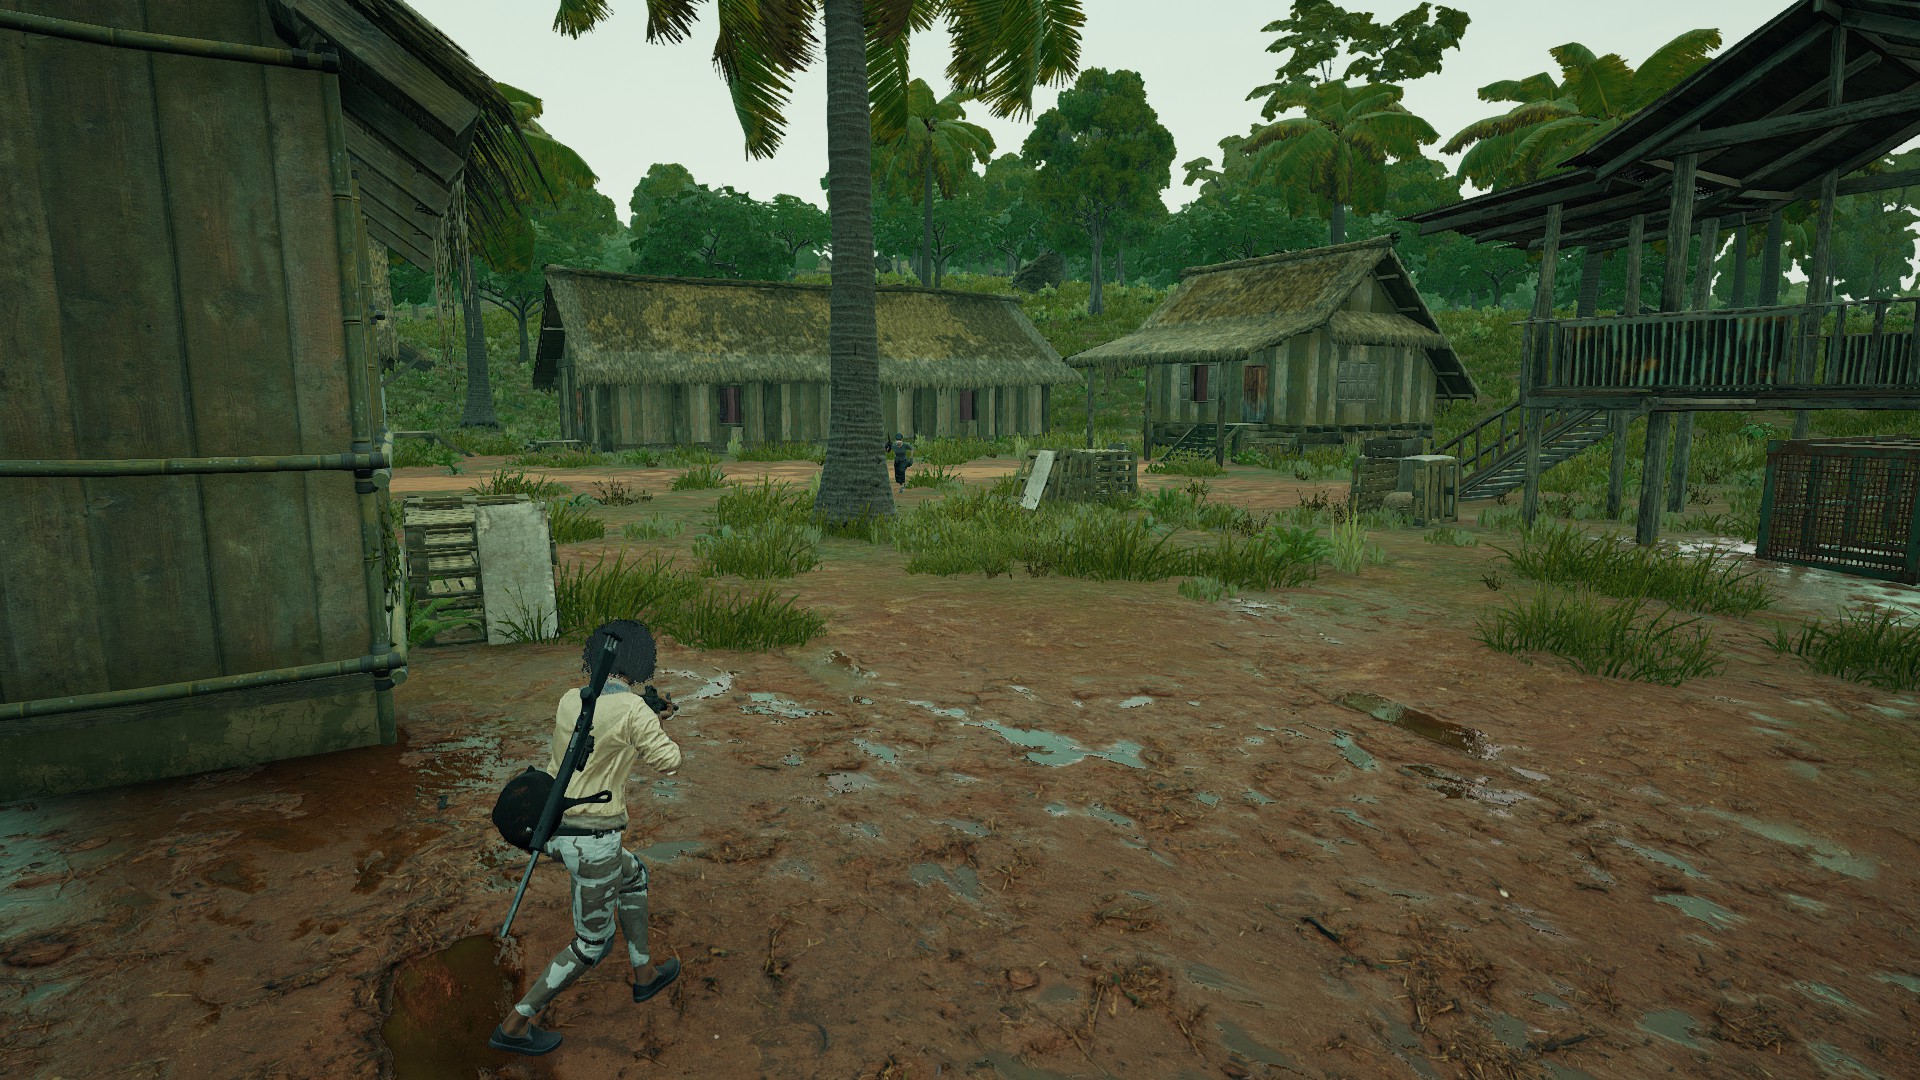 PUBG Sanhok drops: A player walking through a small village in Sanhok, with another player hiding behind a large tree at the center of the location.